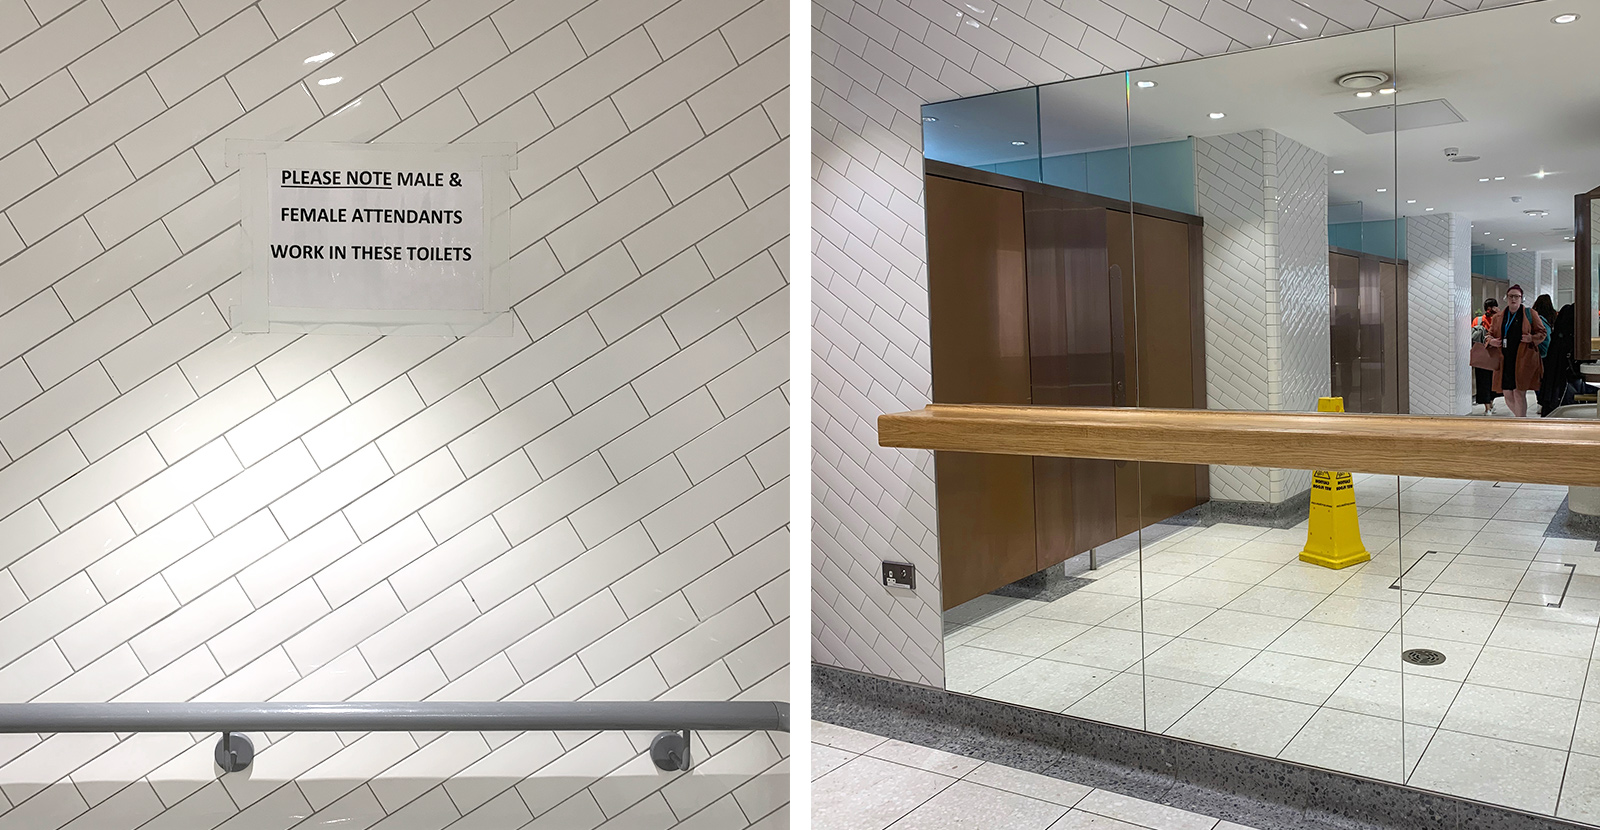 Left: With no provisions for notices, the only option is to hang makeshift signs applied to the wall with tape. London Victoria Rail Station WC. - Right: A large mirror and the far end of the facilities is wise choice in providing enough space for those applying makeup without blocking access to a handbasin. London Victoria Rail Station WC.